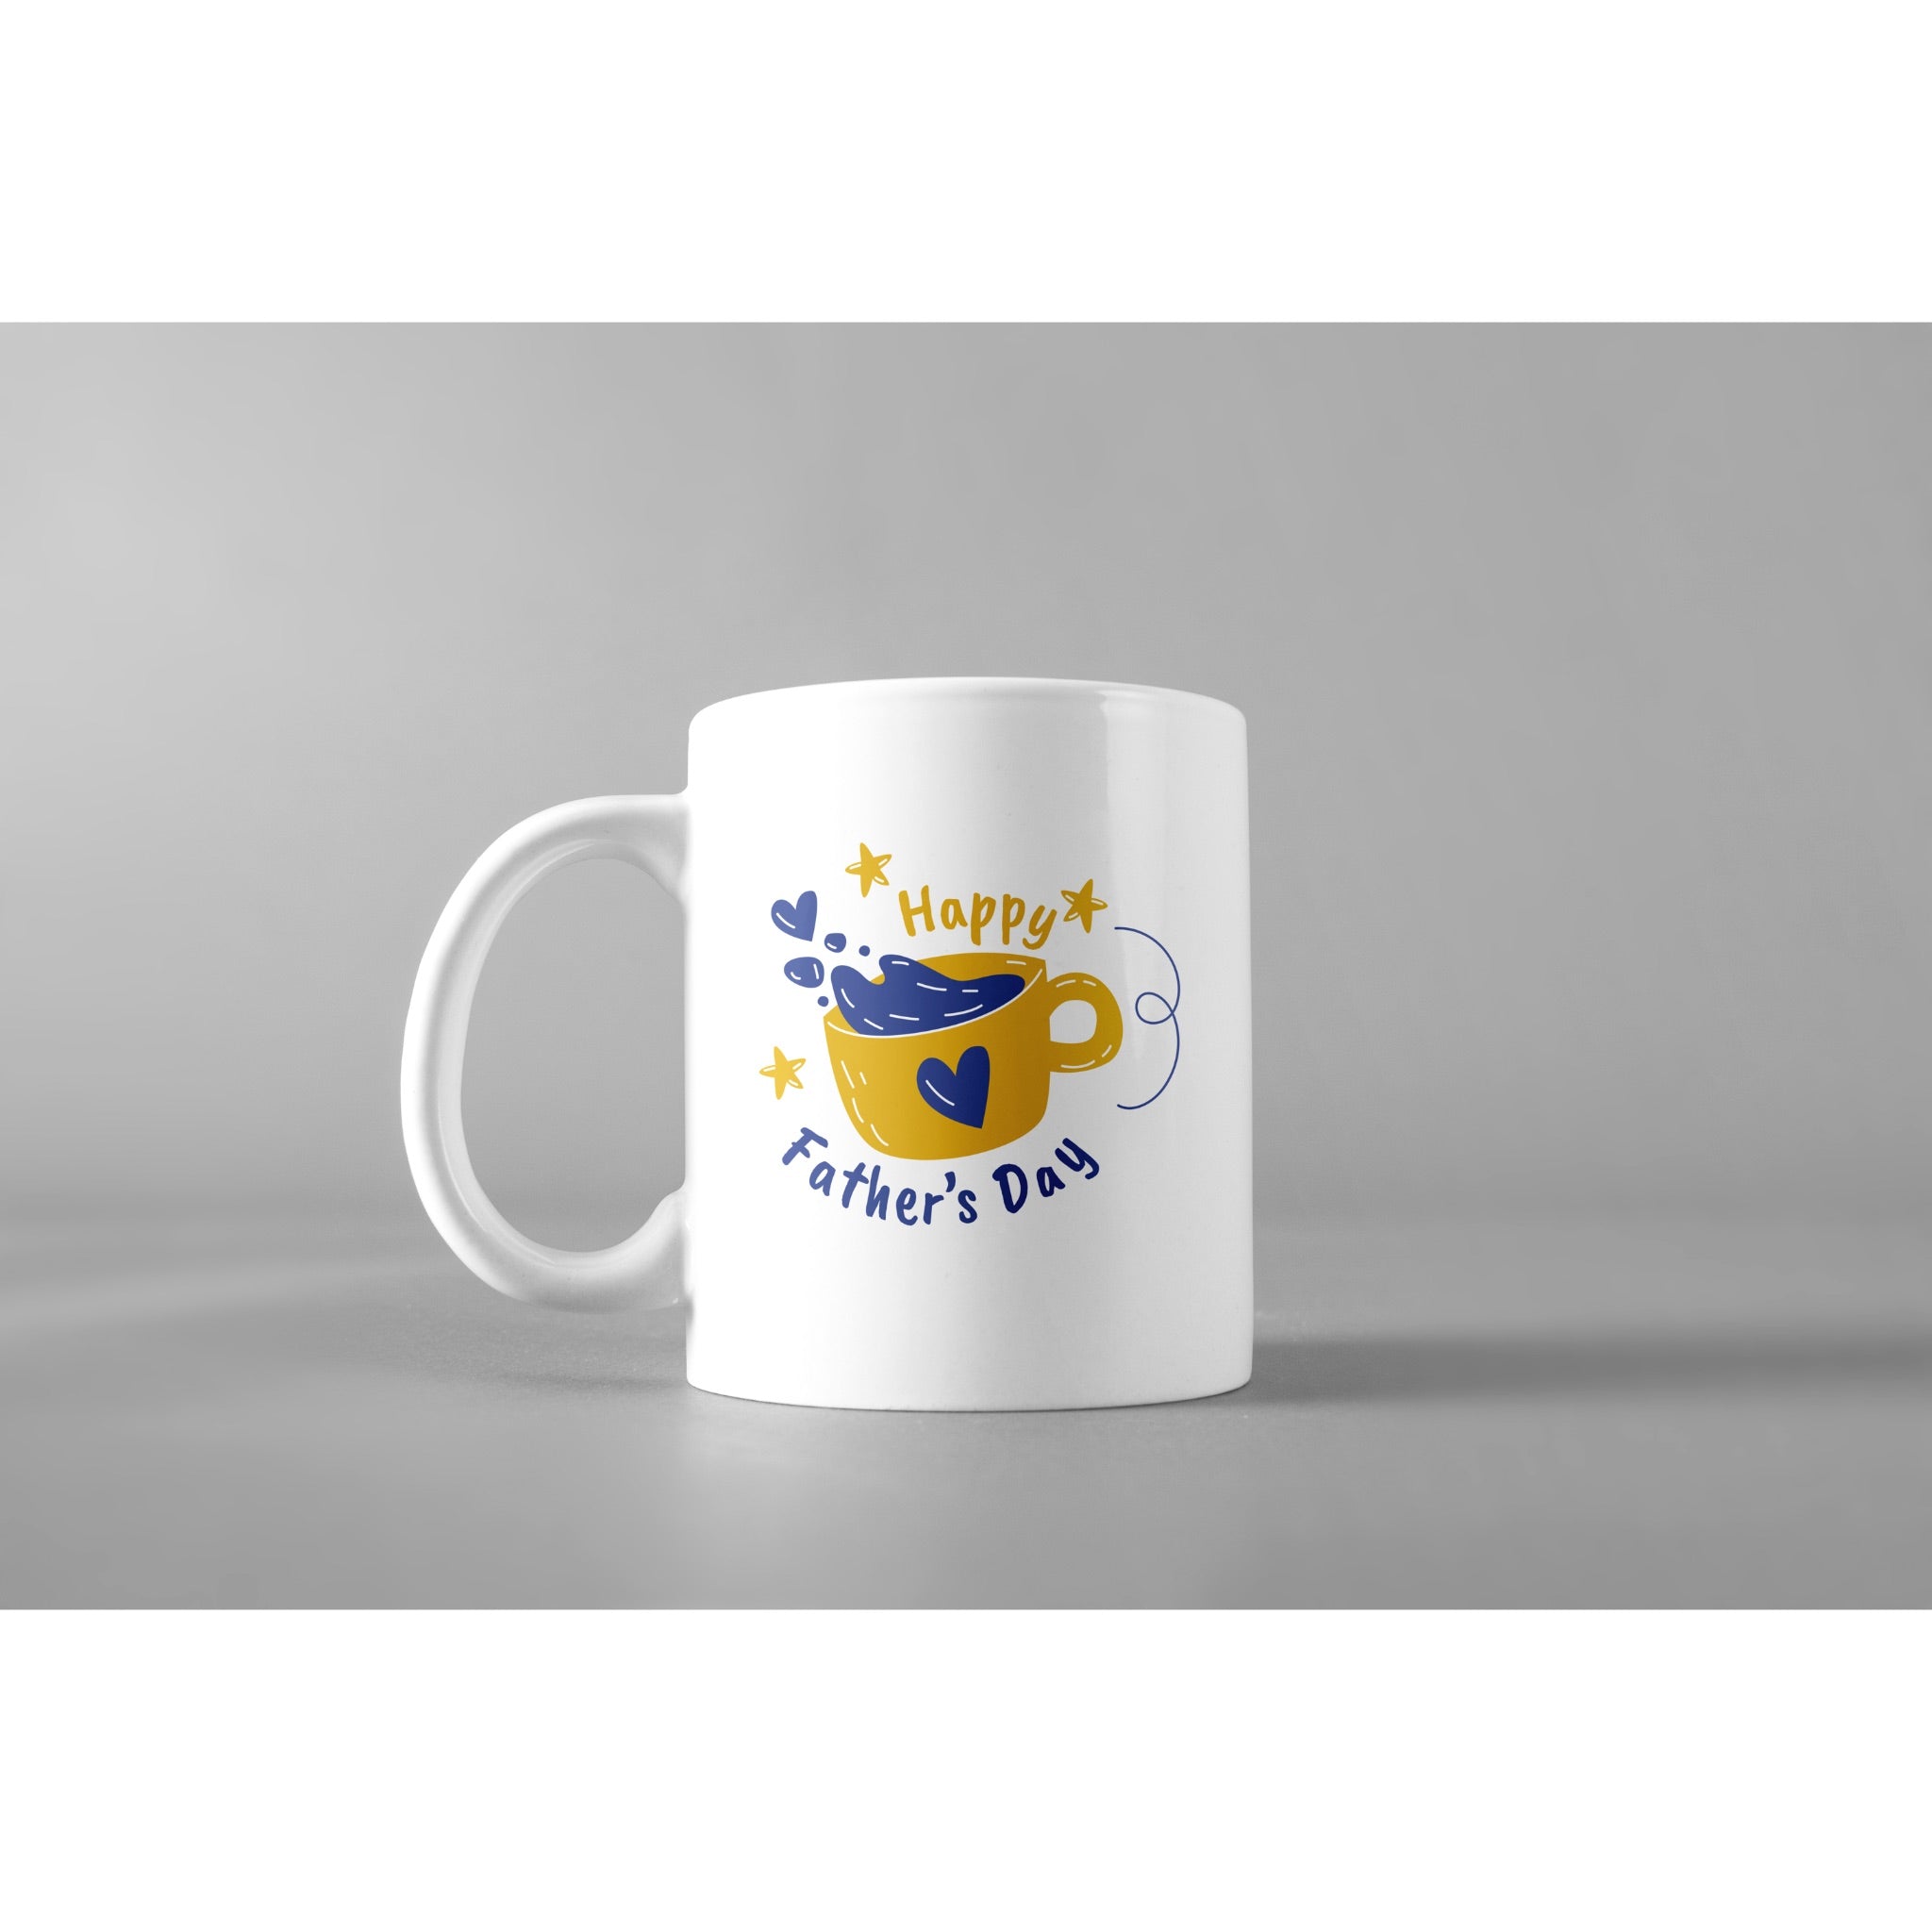 Happy Father's Day cup- Mugs for Father